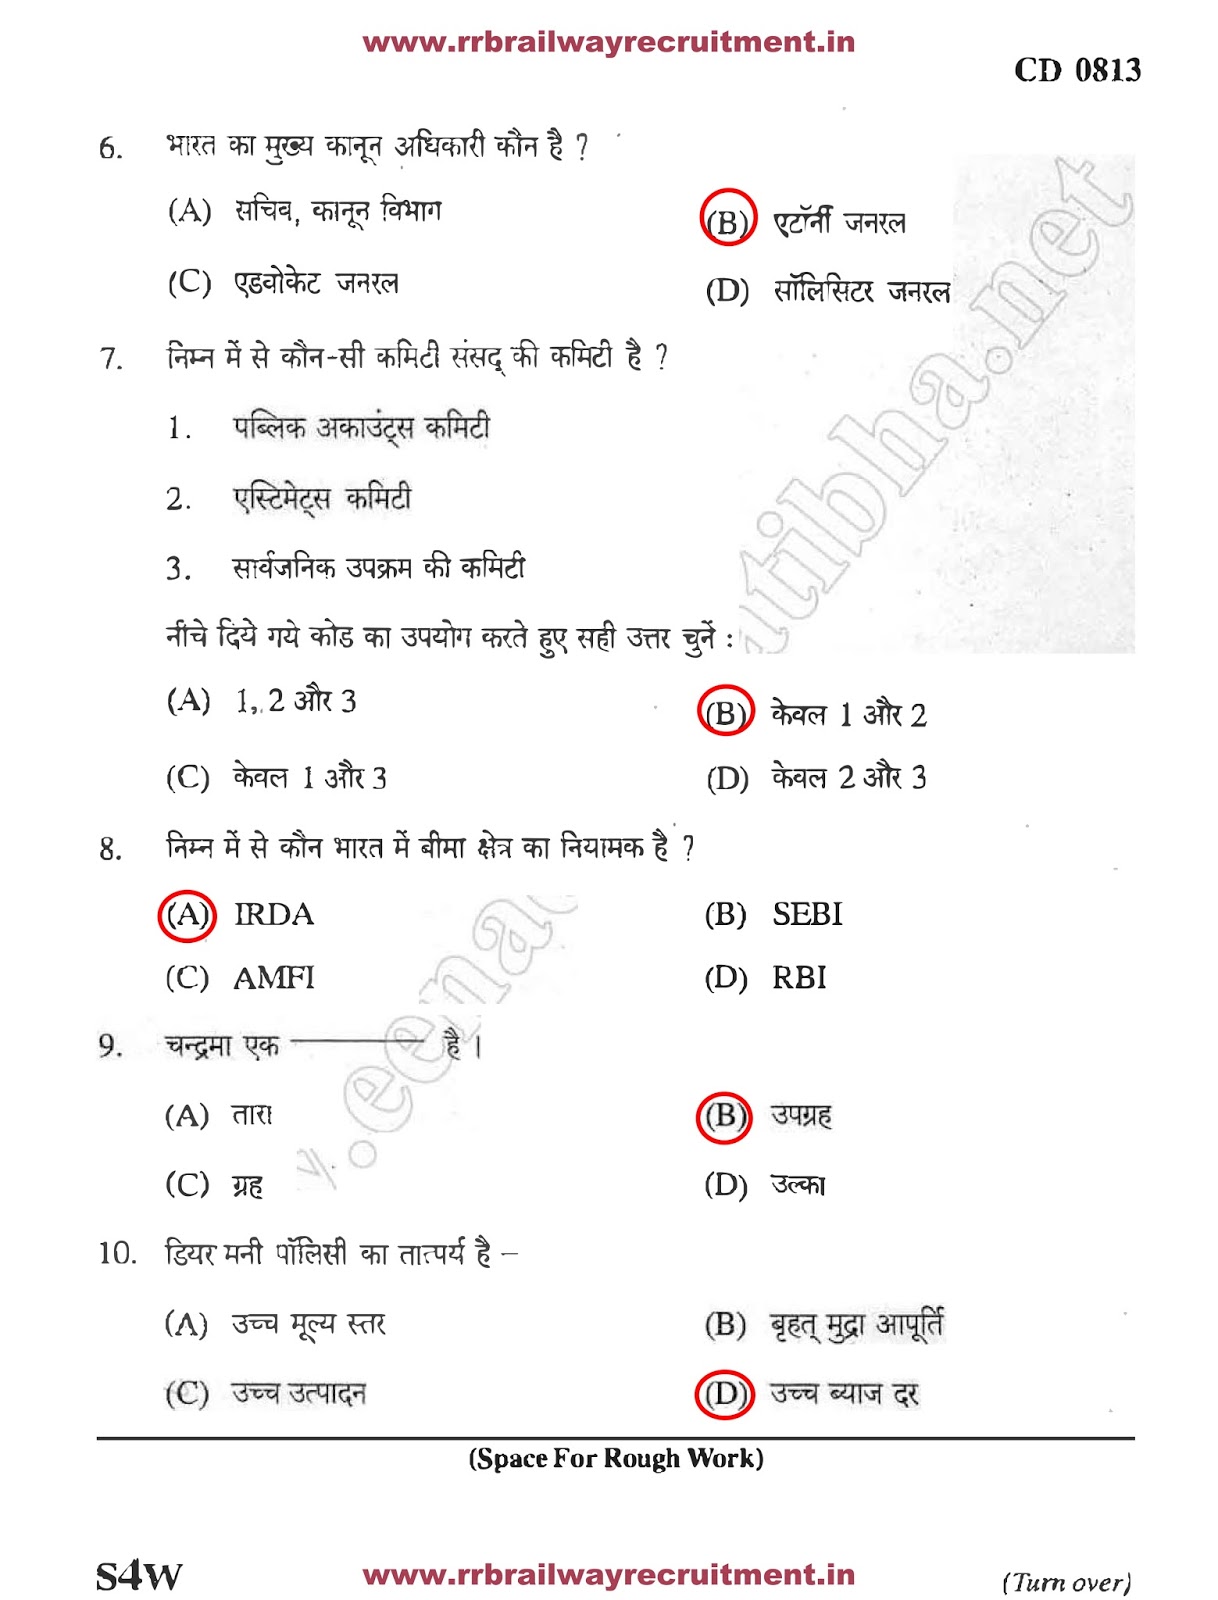 general science questions for ntpc